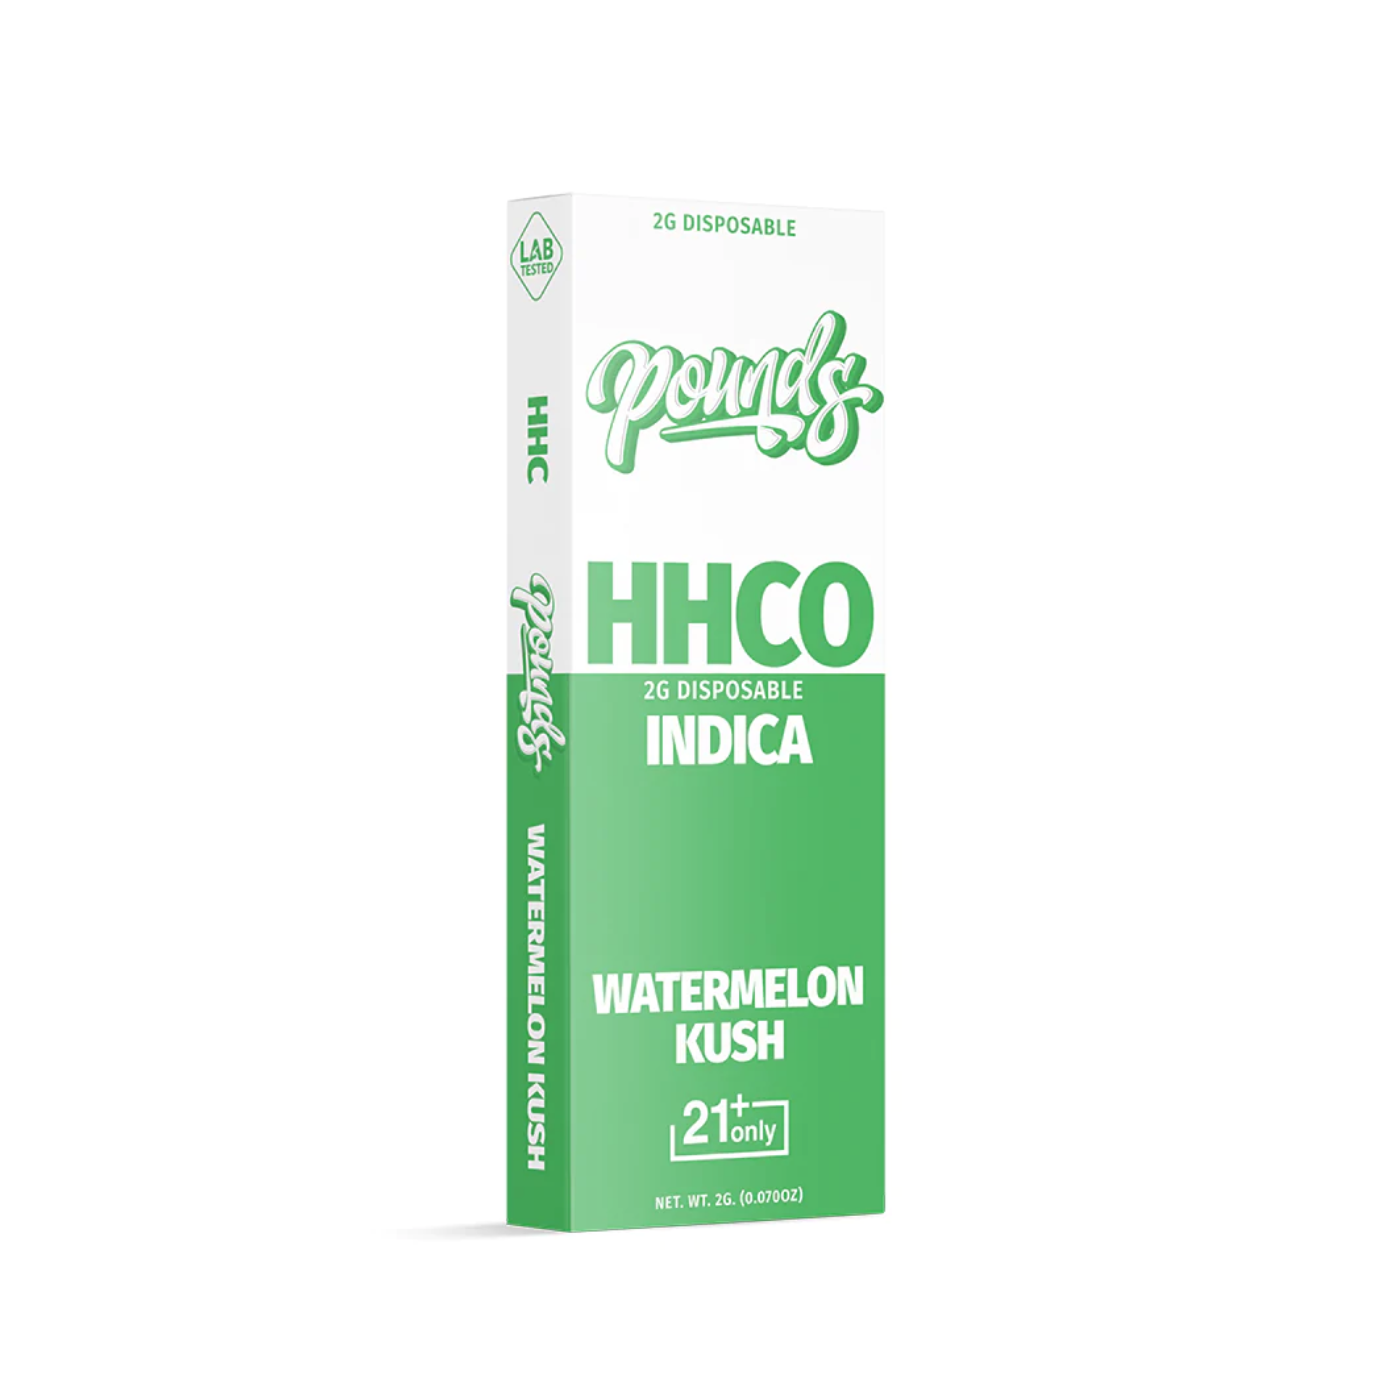 HHCO – INDICA – WATERMELON KUSH – 2G -Disposable – POUNDS